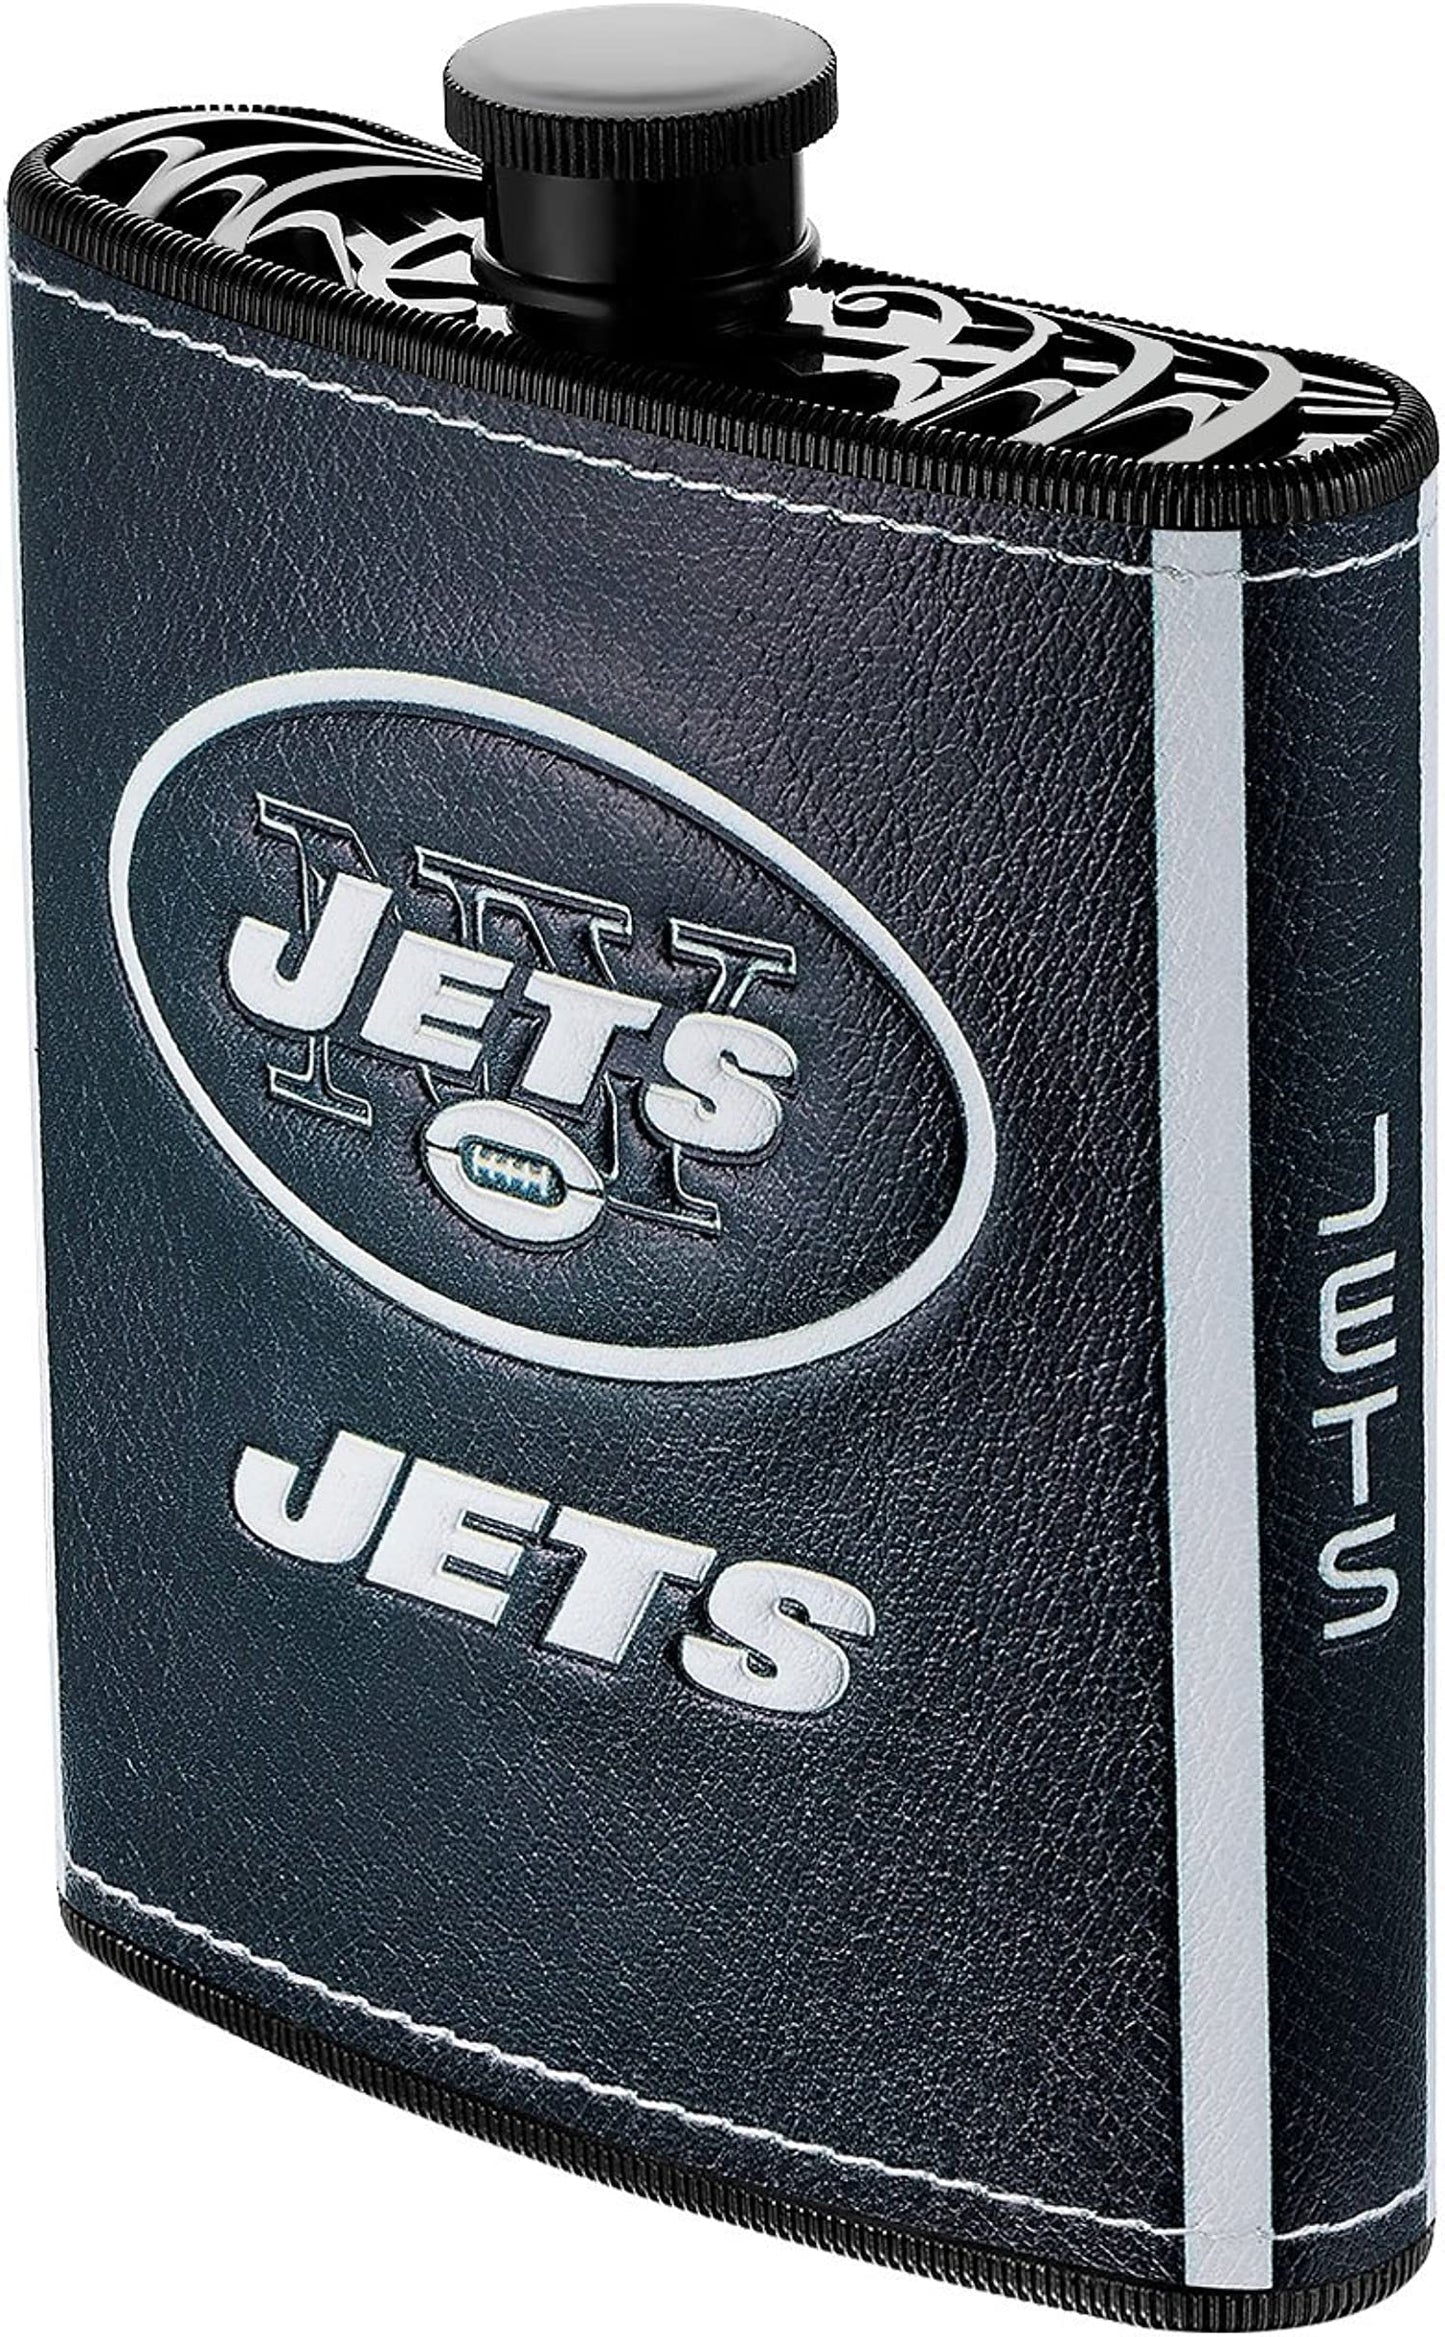 New York Jets Plastic Hip Flask, 7-ounce